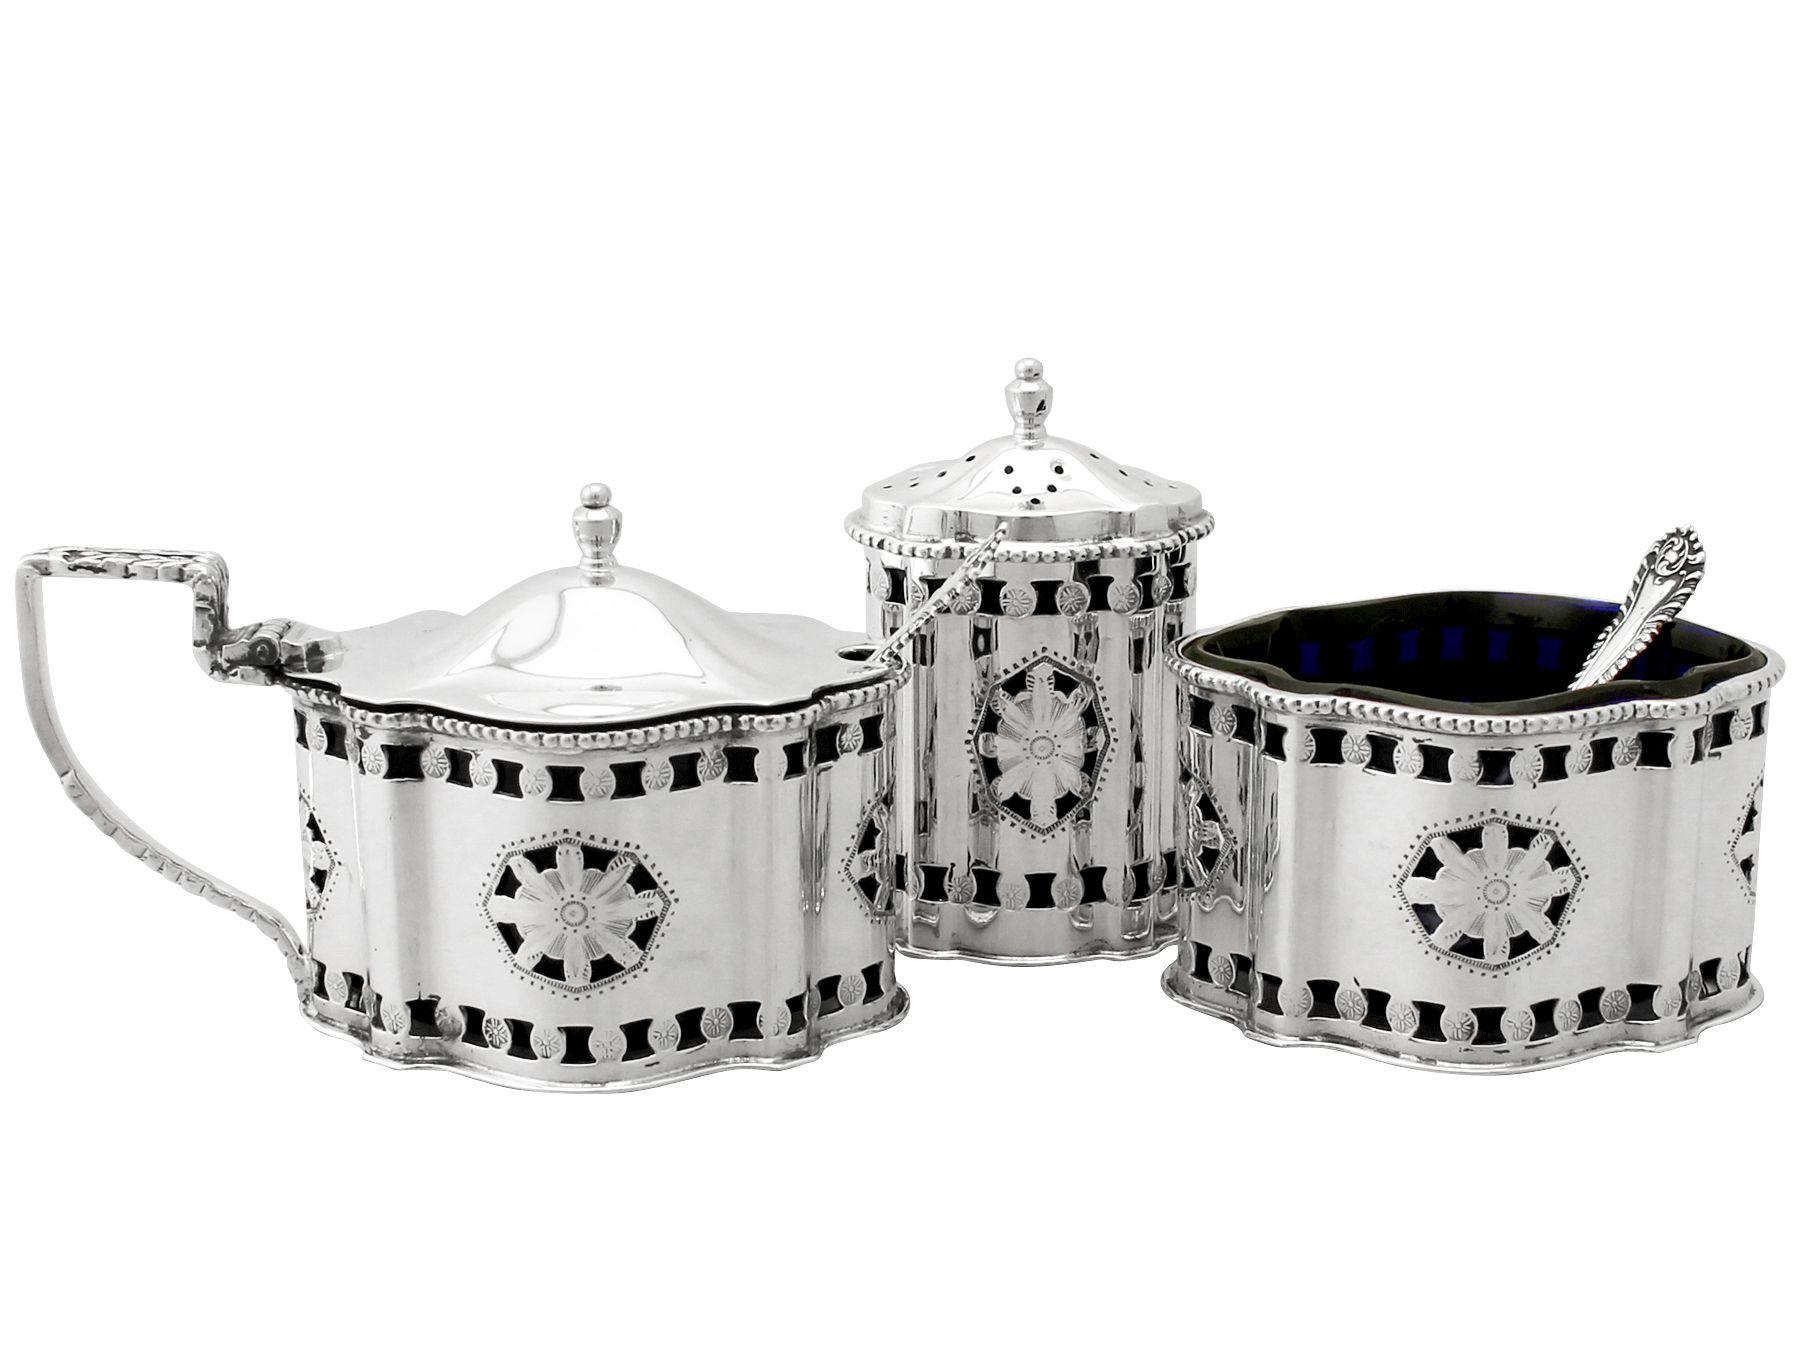 An exceptional, fine and impressive contemporary English sterling silver three-piece condiment set, boxed; an addition to our dining silverware collection.

This exceptional sterling silver three-piece condiment set consists of a salt, pepper pot